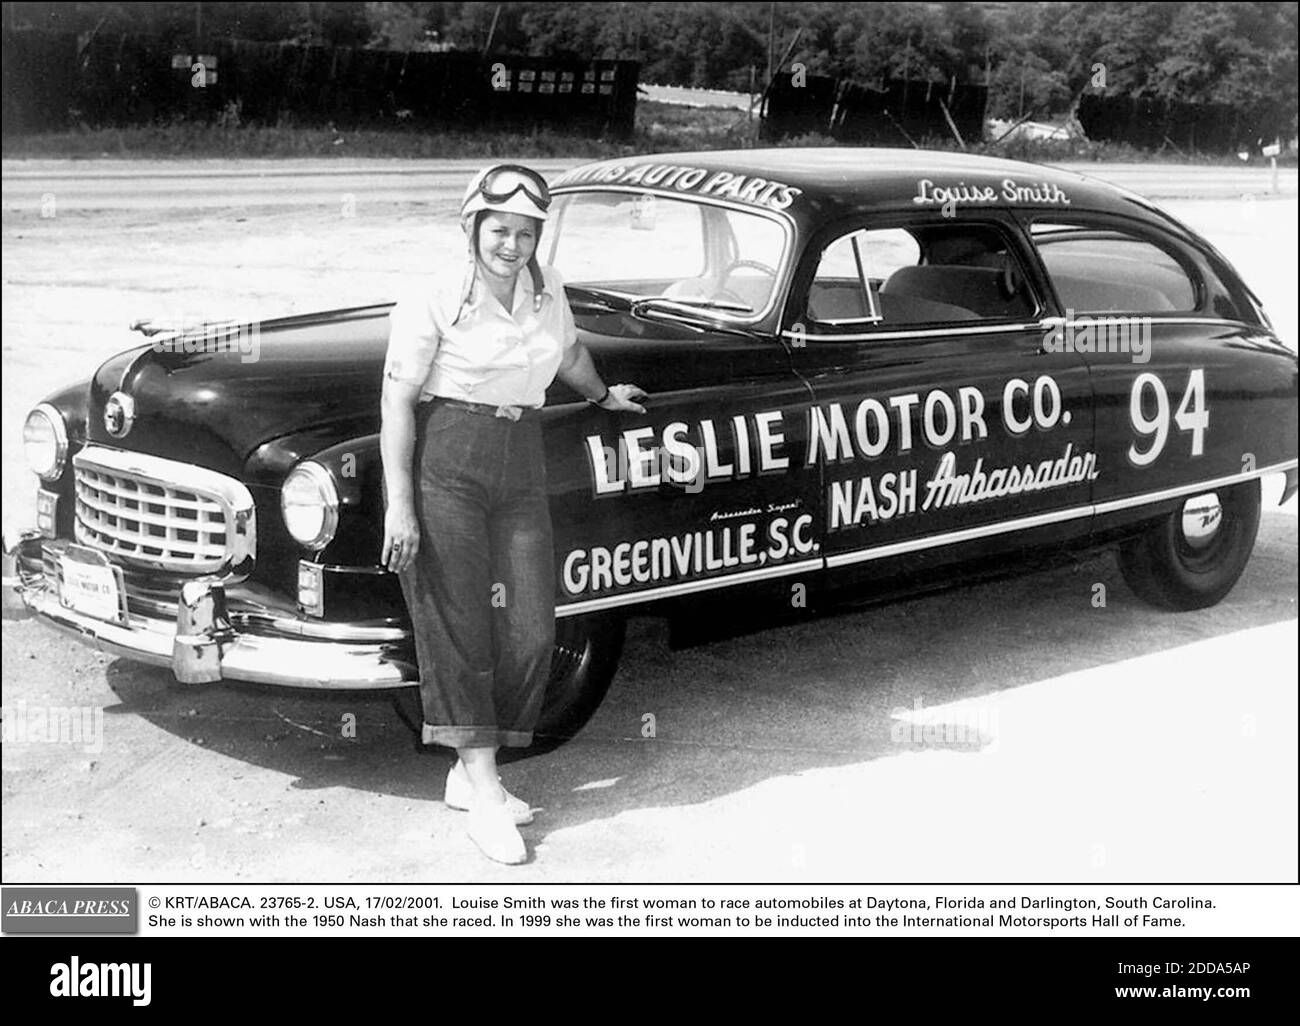 NO FILM, NO VIDEO, NO TV, NO DOCUMENTARY - © KRT/ABACA. 23765-2. USA, 17/02/2001. Louise Smith was the first woman to race automobiles at Daytona, Florida and Darlington, South Carolina. She is shown with the 1950 Nash that she raced. In 1999 she was the first woman to be inducted into the Interna Stock Photo